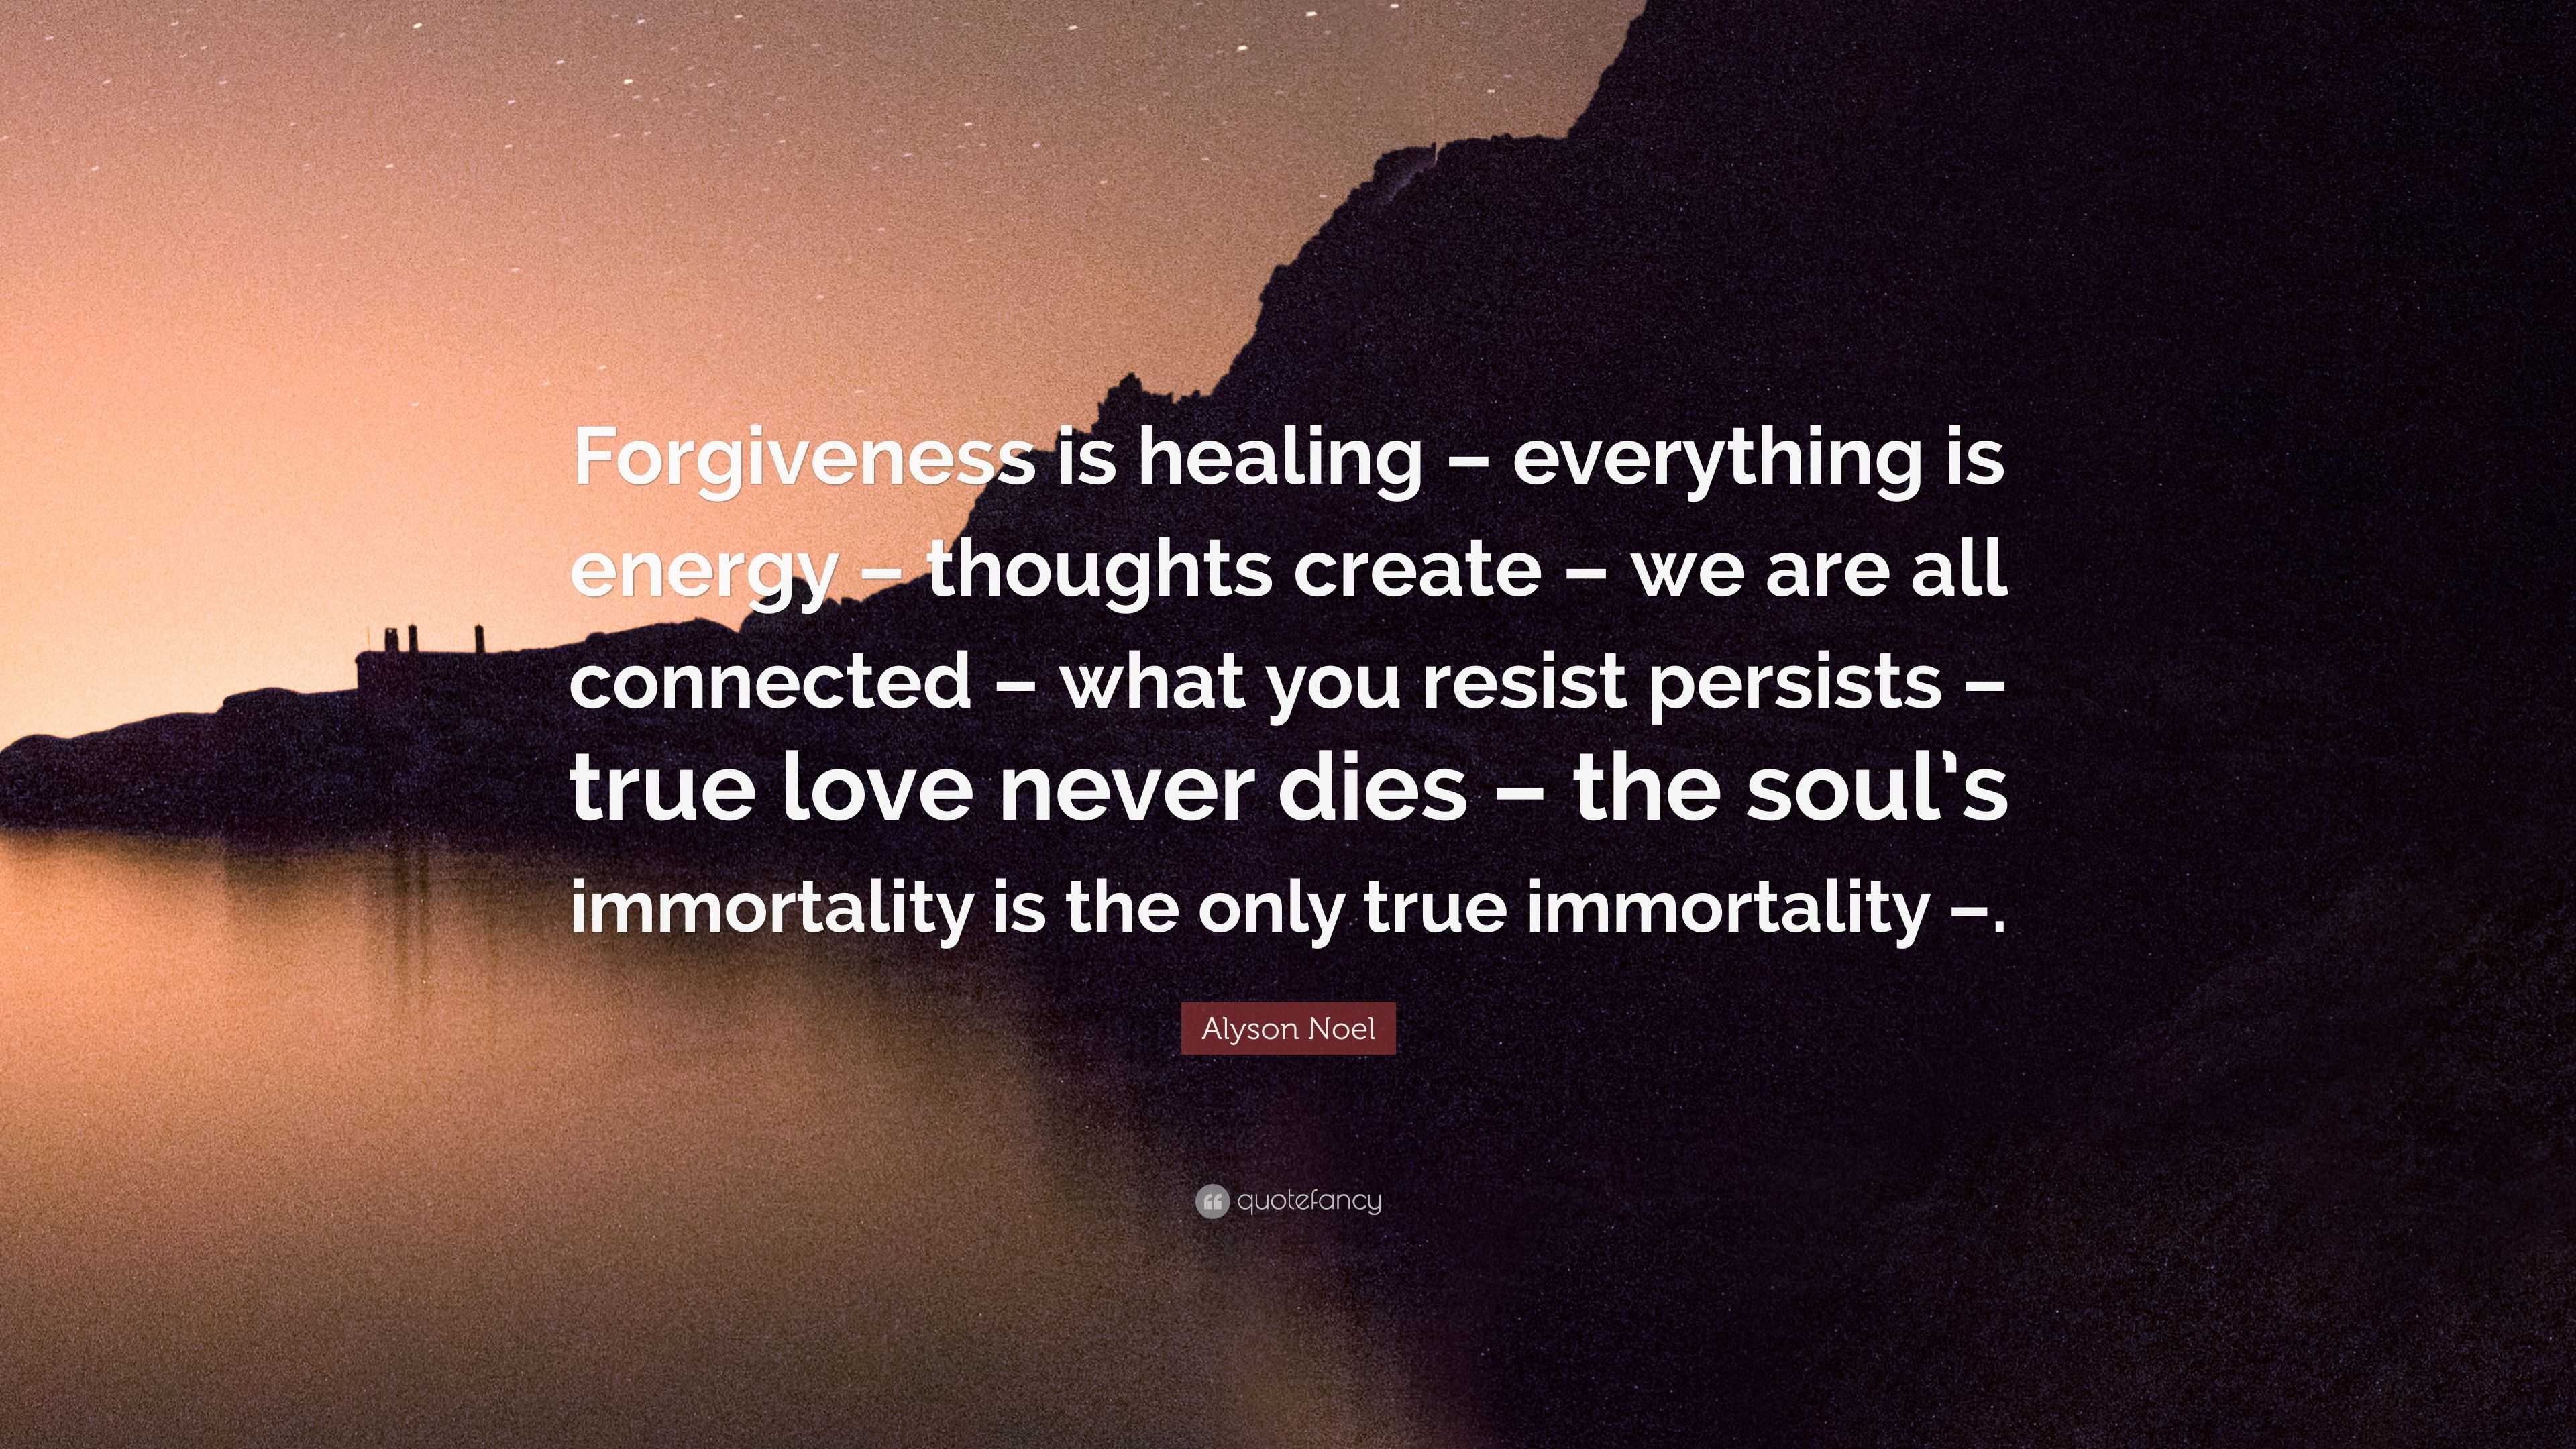 Alyson Noel Quote “Forgiveness is healing – everything is energy – thoughts create –